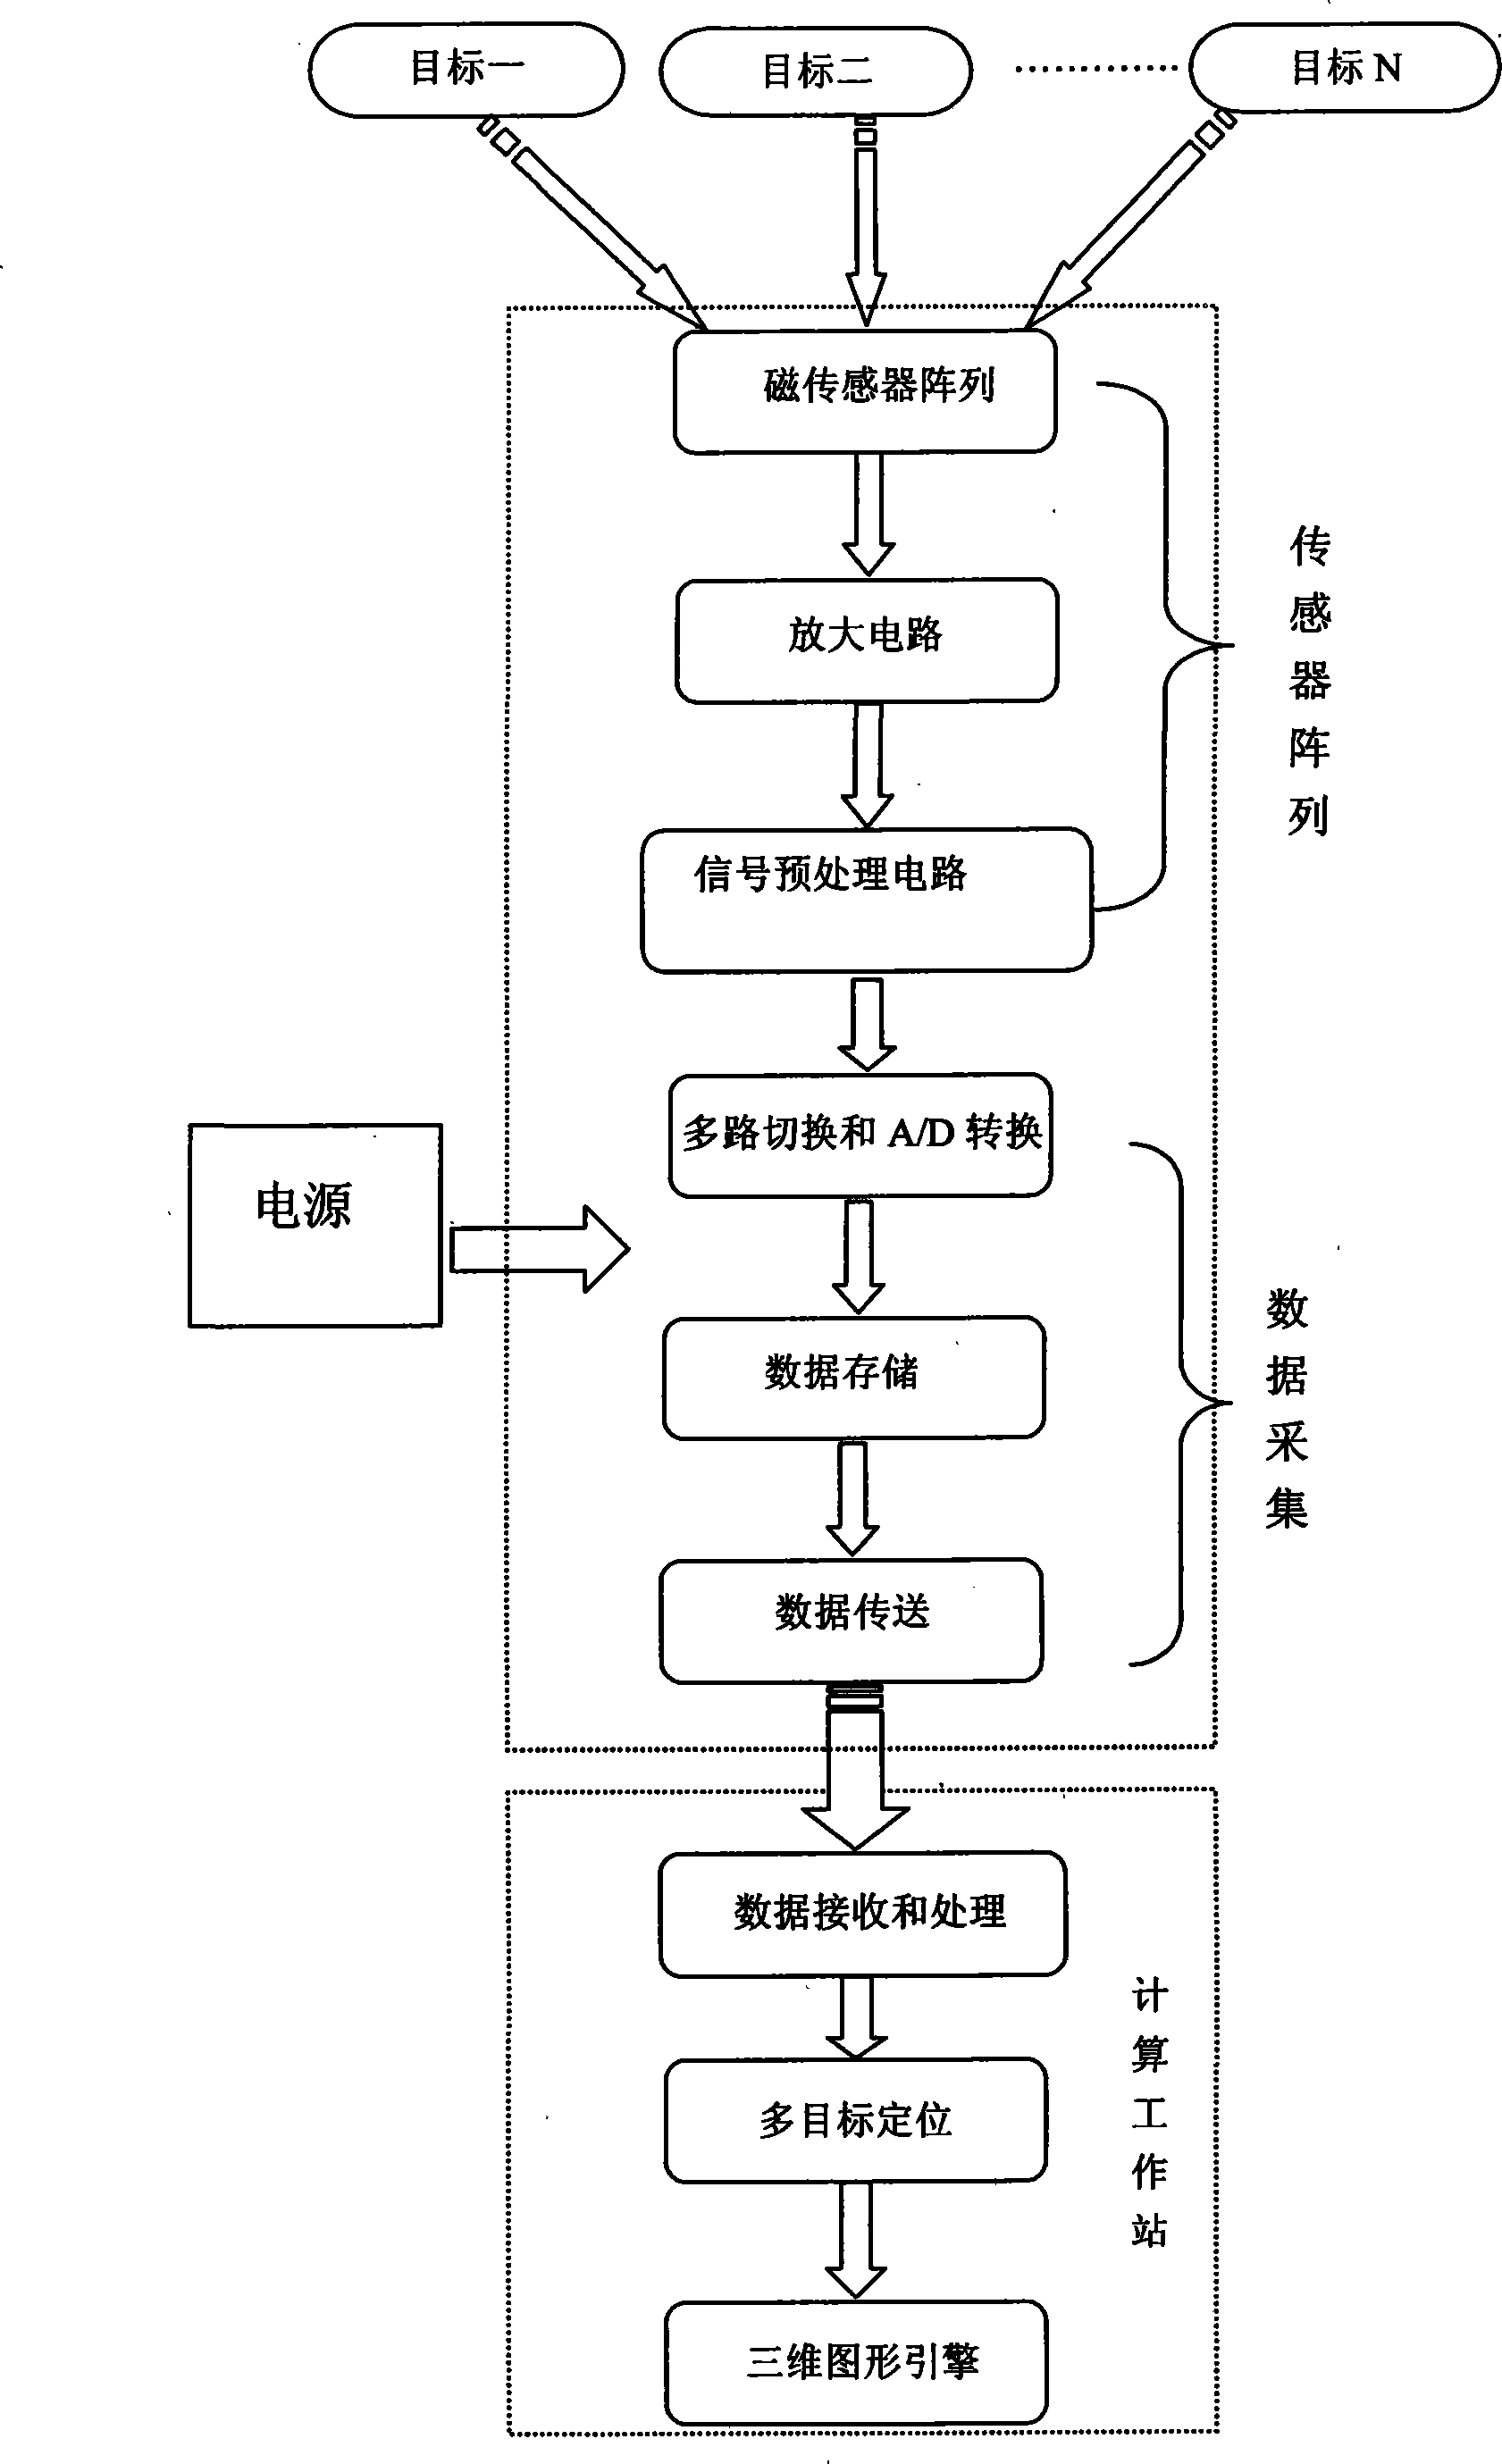 Multi-magnetic target positioning method and system